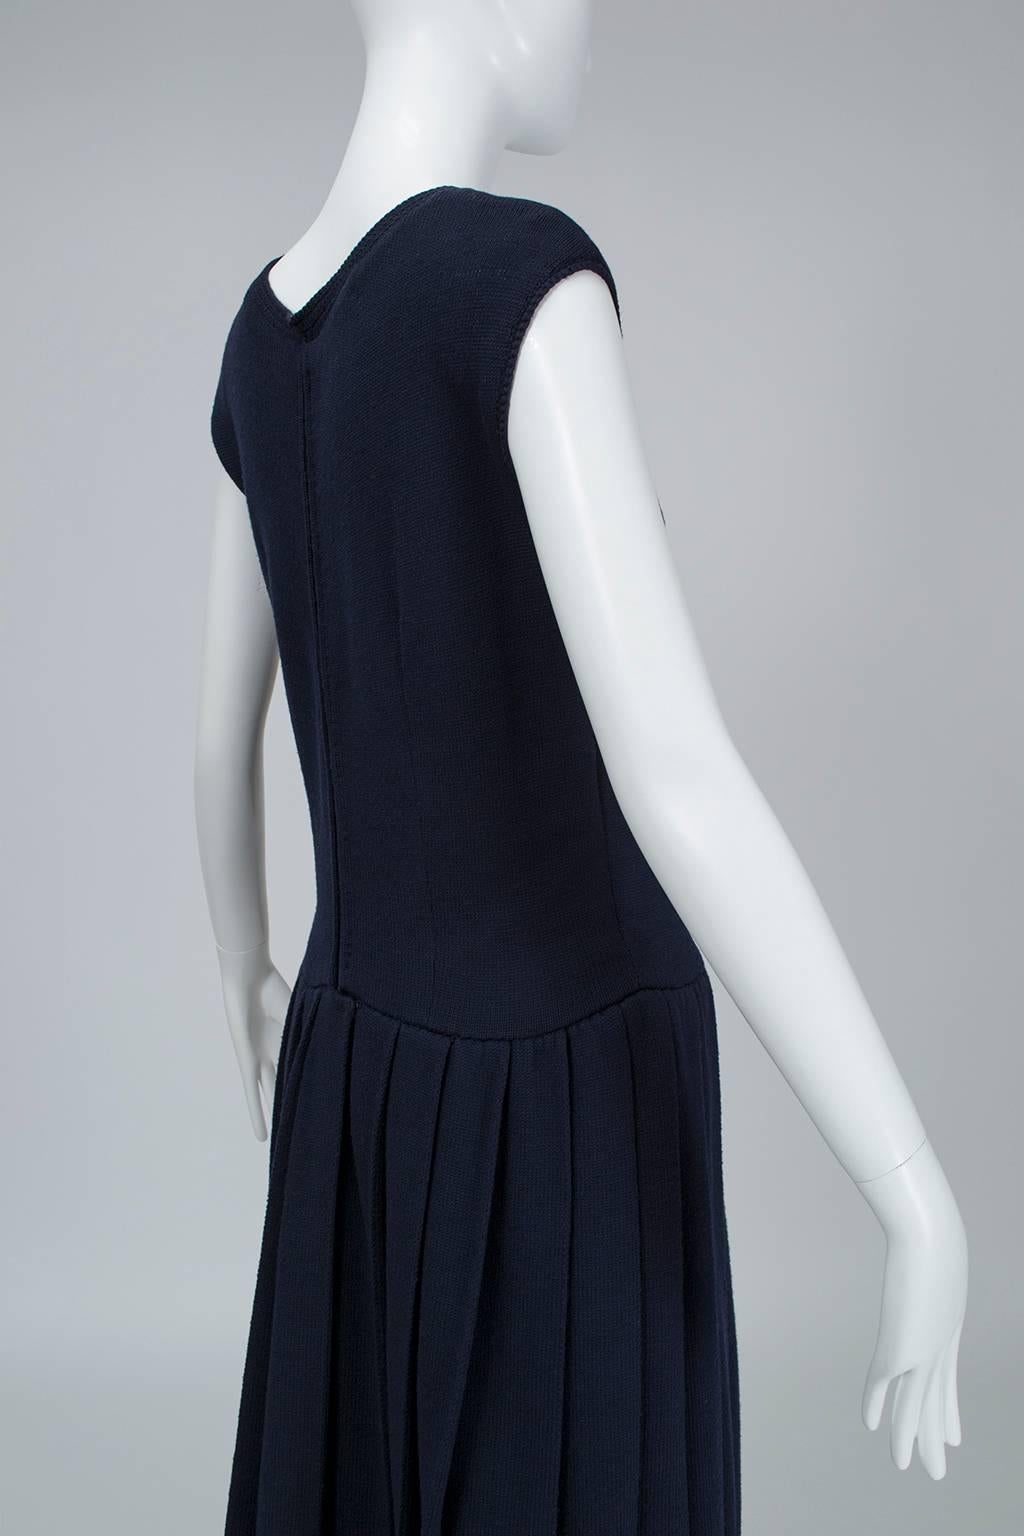 Norman Norell Navy Knife Pleat Knit Dress, 1960s 1